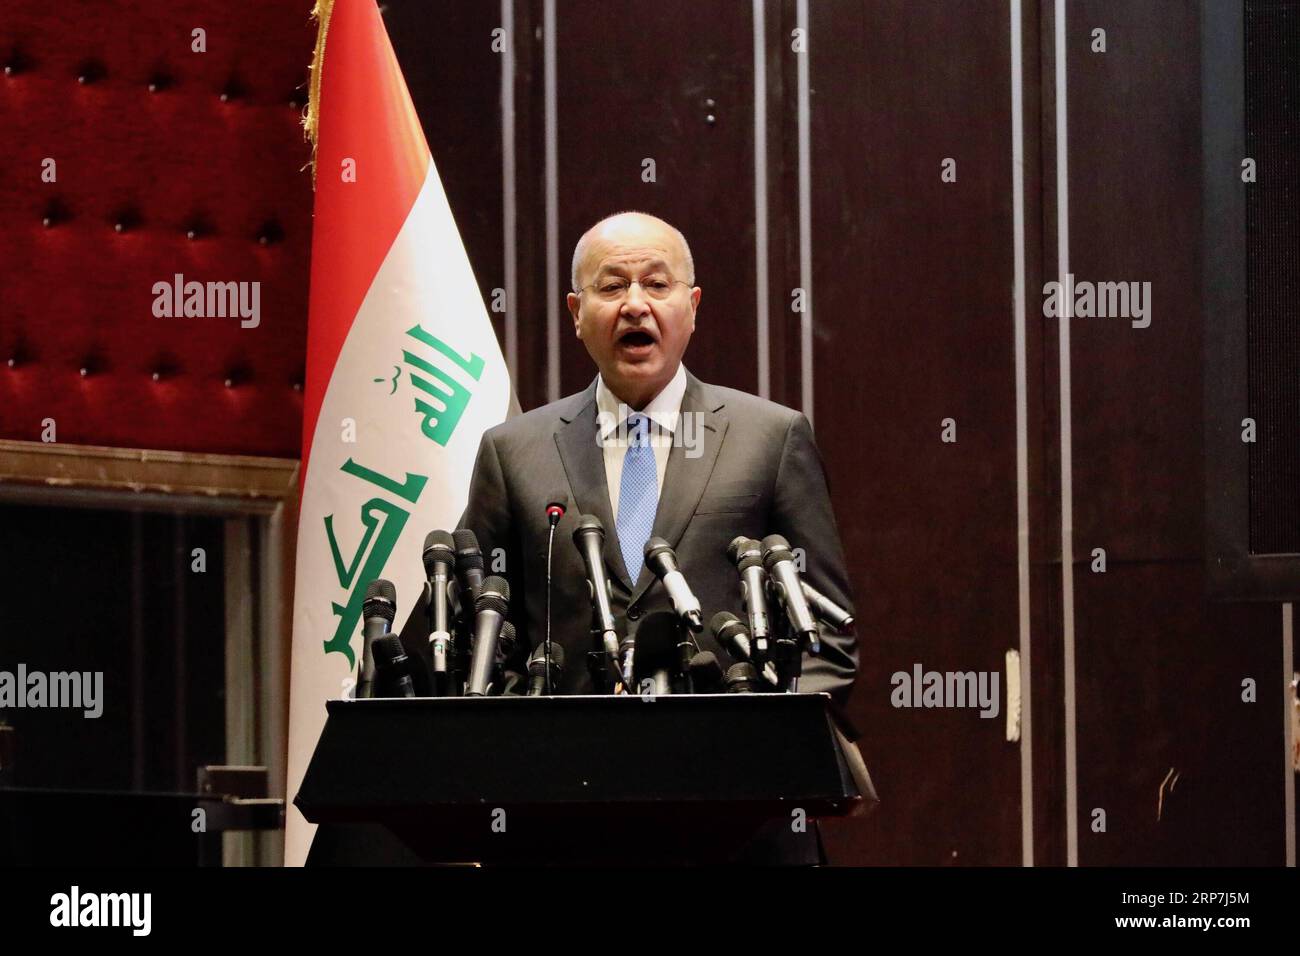 190207 -- BAGHDAD, Feb. 7, 2019 -- Iraqi President Barham Salih speaks at the opening ceremony of the Baghdad International Book Fair 2019, in Baghdad, Iraq, Feb. 7, 2019. The fair kicked off Thursday with the participation of hundreds of publishers and high attendance of readers, as it sheds more light on eradicating terror and extremism in the war-torn country.  IRAQ-BAGHDAD-INTERNATIONAL BOOK FAIR-OPENING KhalilxDawood PUBLICATIONxNOTxINxCHN Stock Photo